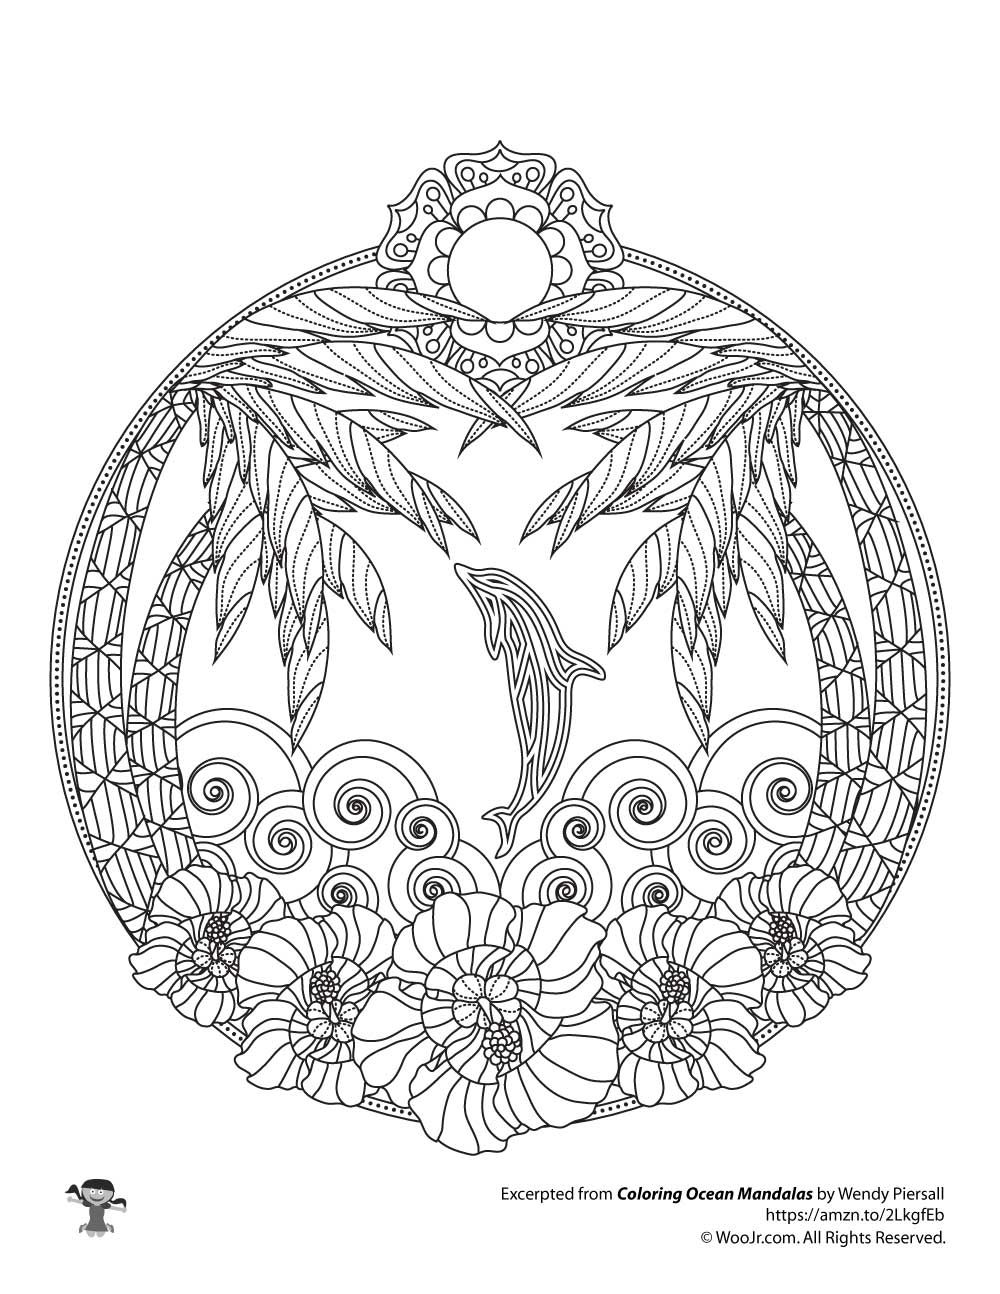 Mandala Coloring Pages Free Online Coloring Pages Tropical Beach And Dolphin Ocean Mandala Adult